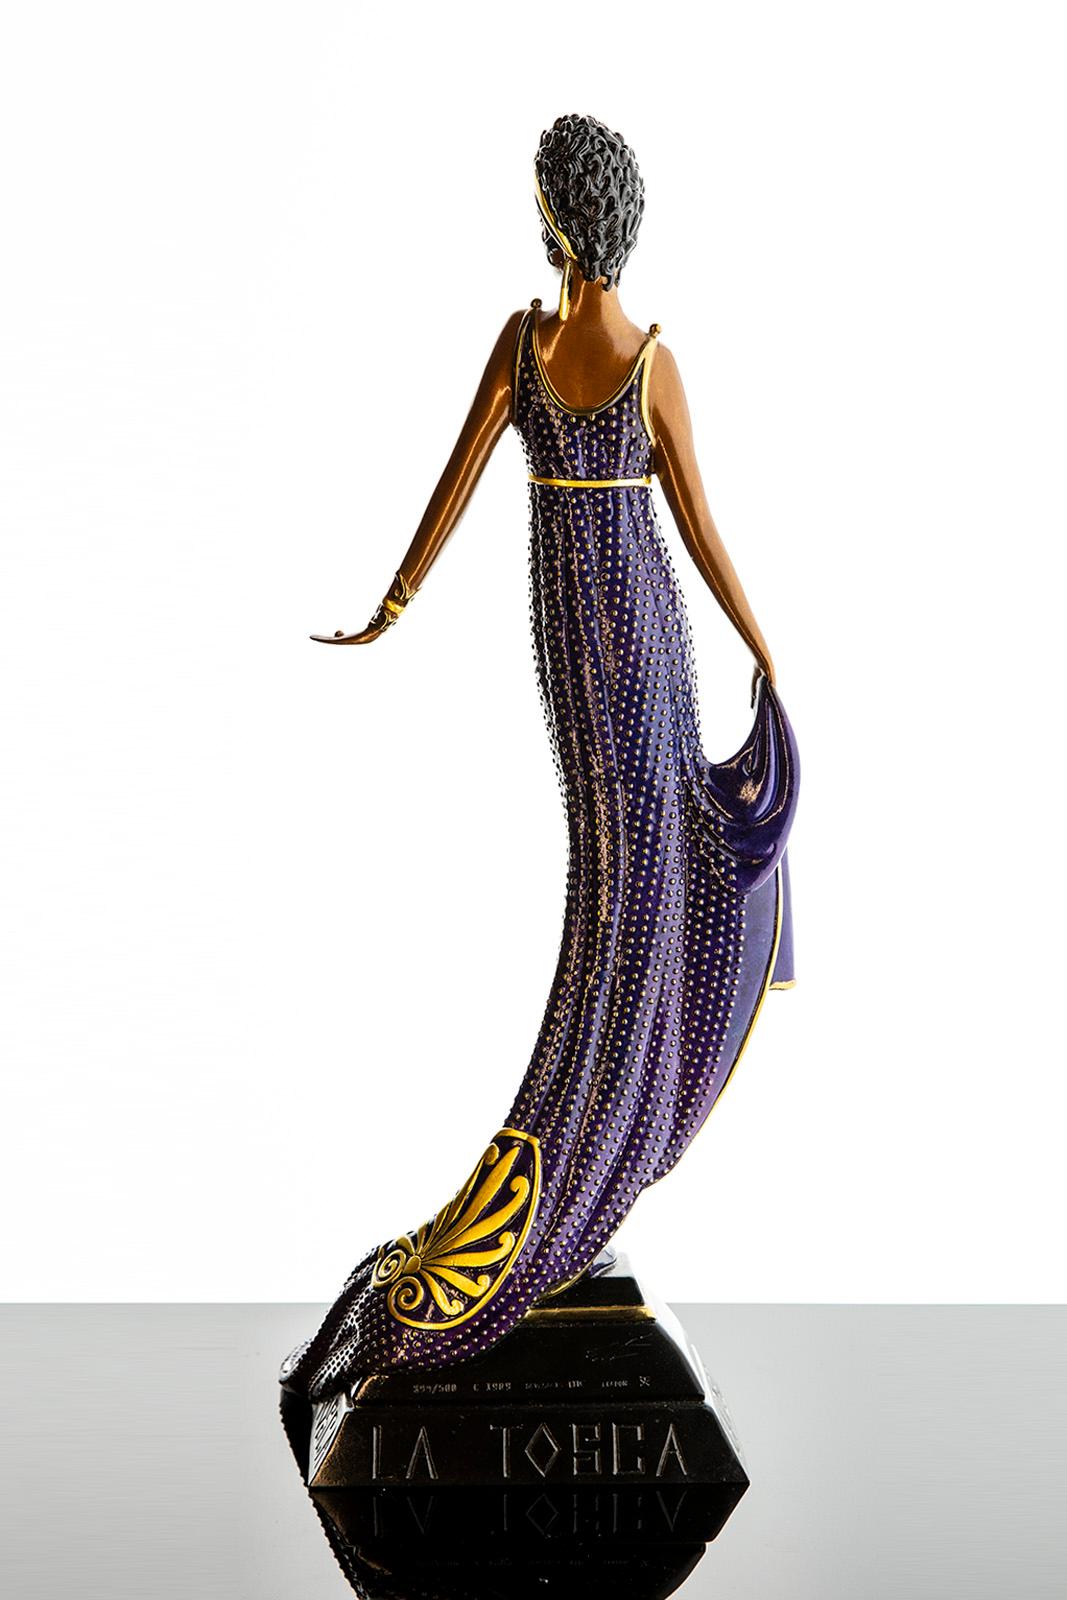 Artist: Erte
Title: La Tosca
Medium: Bronze Sculpture
Dimensions: 19.75' x 8.5'' x 7''
Edition: of 500
Current Retail: $10,000
Year: 1989

Here is a gorgeous example of Erte's La Tosca.  In excelent condition this piece stands 19.75' inches tall. 